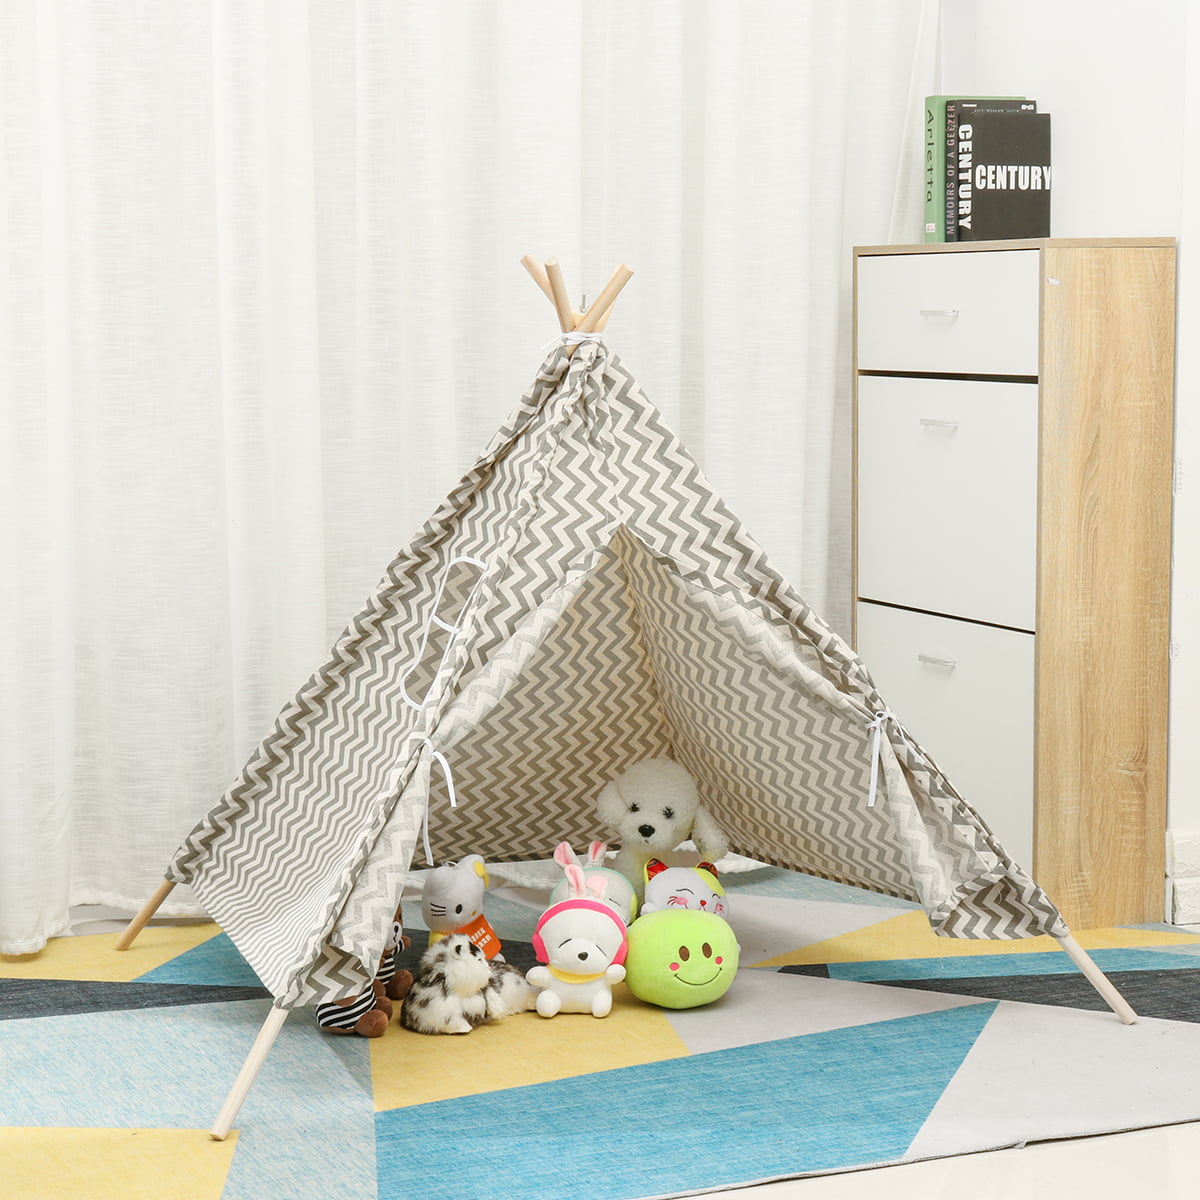 Teepee Tent for KIDS Childrens Indian Wigwam Indoor Play House with BAG TinyLanD 